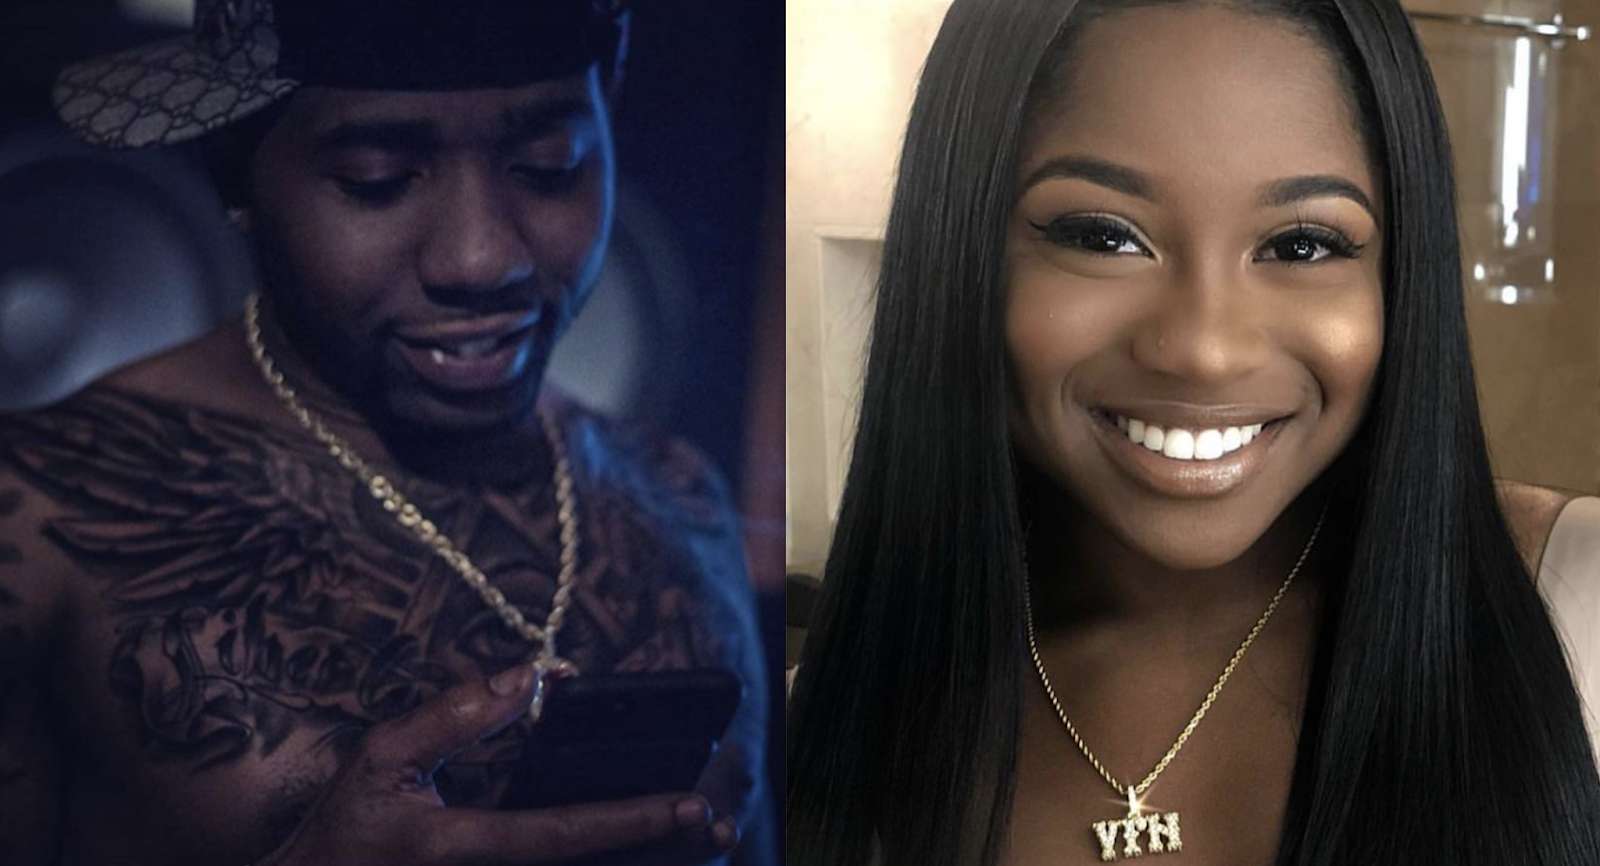 Reginae Carter And YFN Lucci: These IG Posts Have Fans Believing They Are Back Together